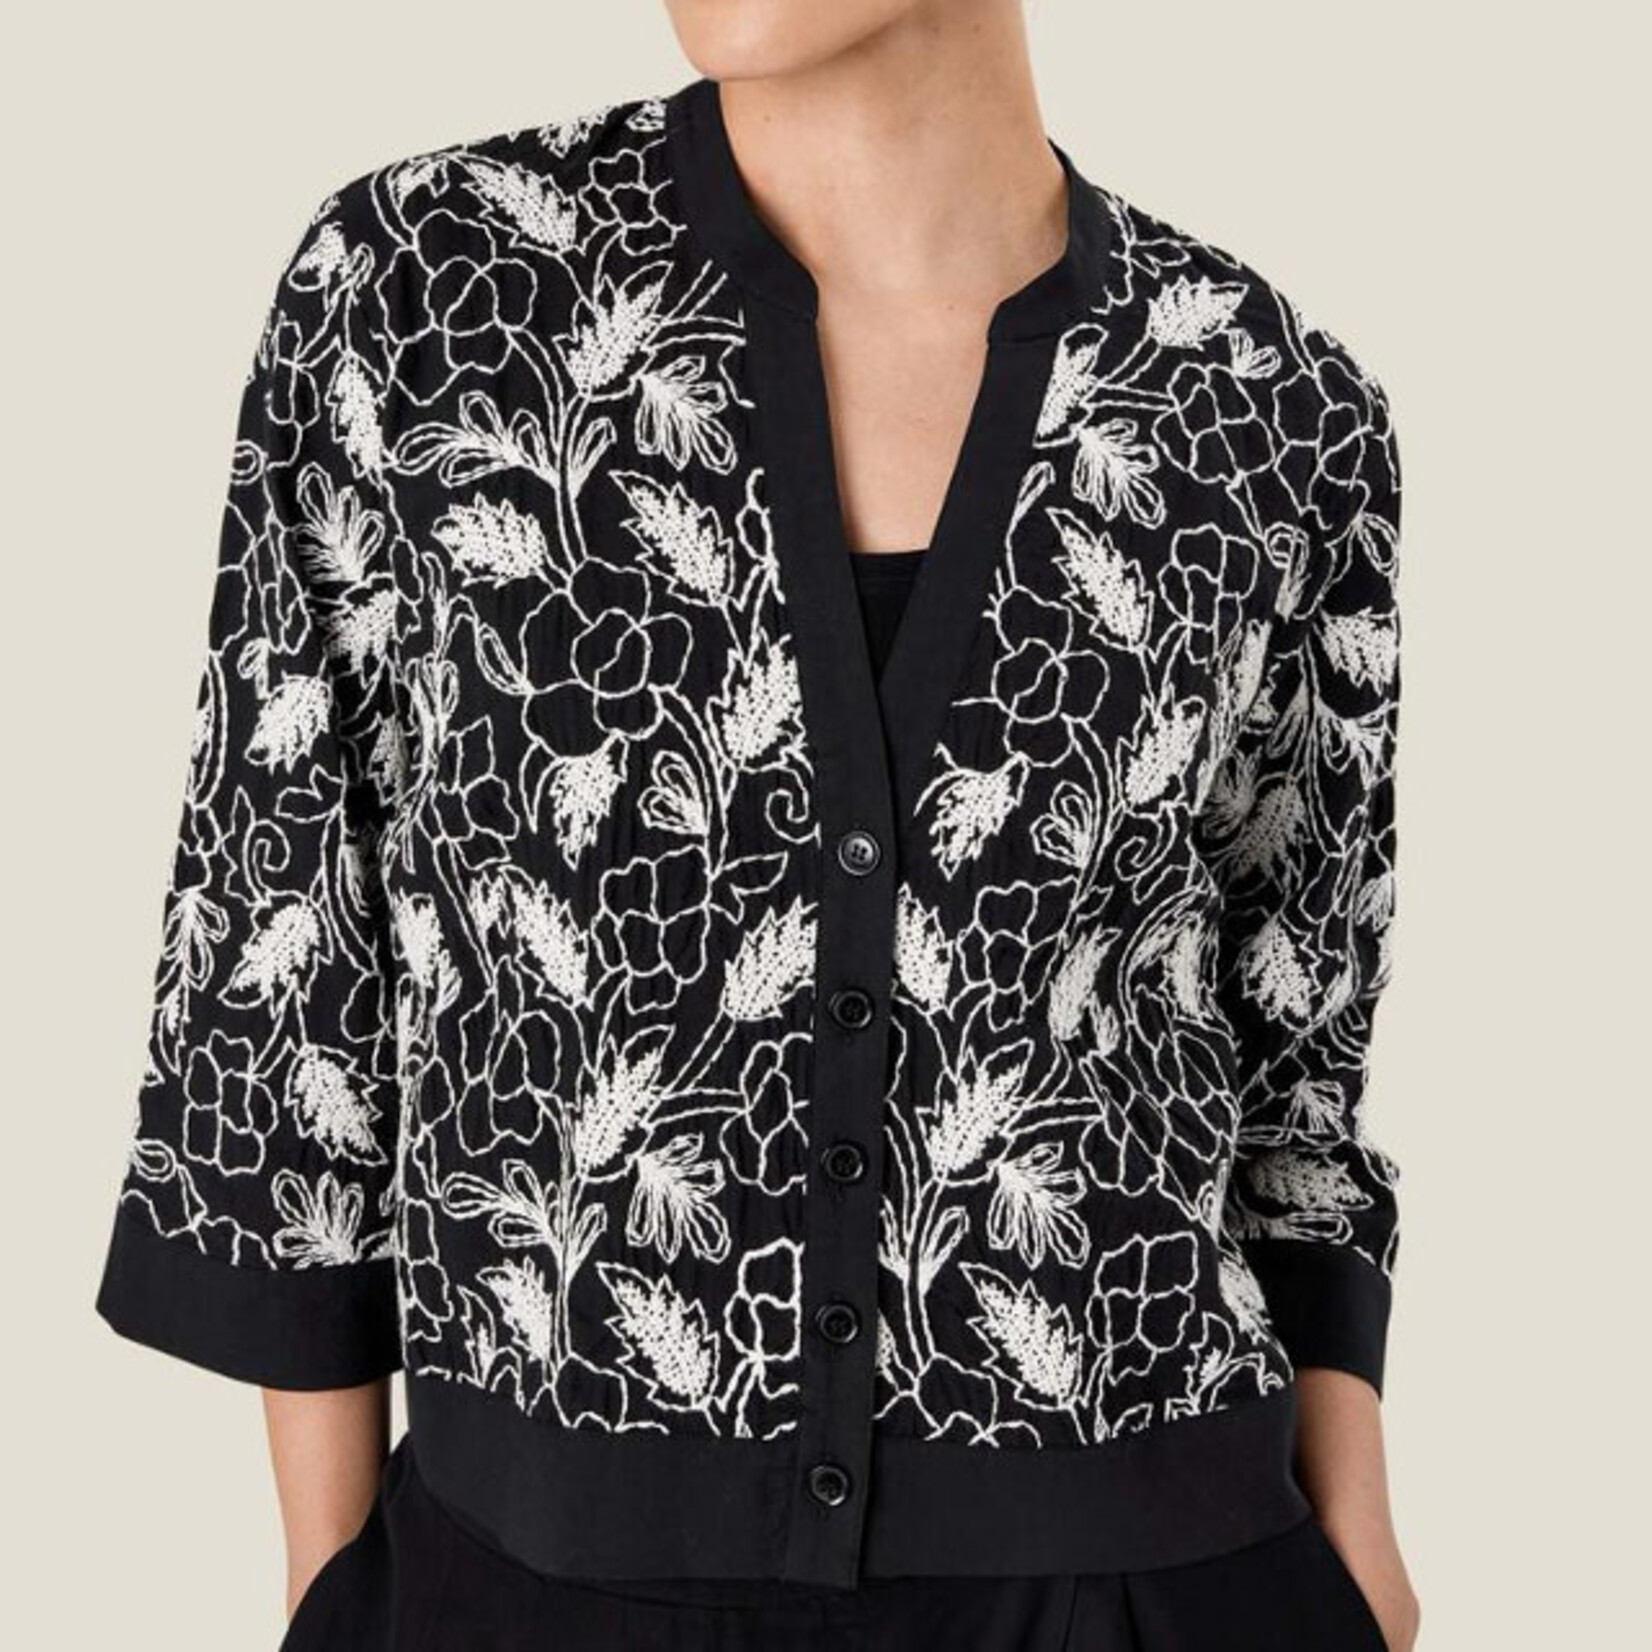 Masai Copenhagen Black With White Floral Embroidery Short Jacket